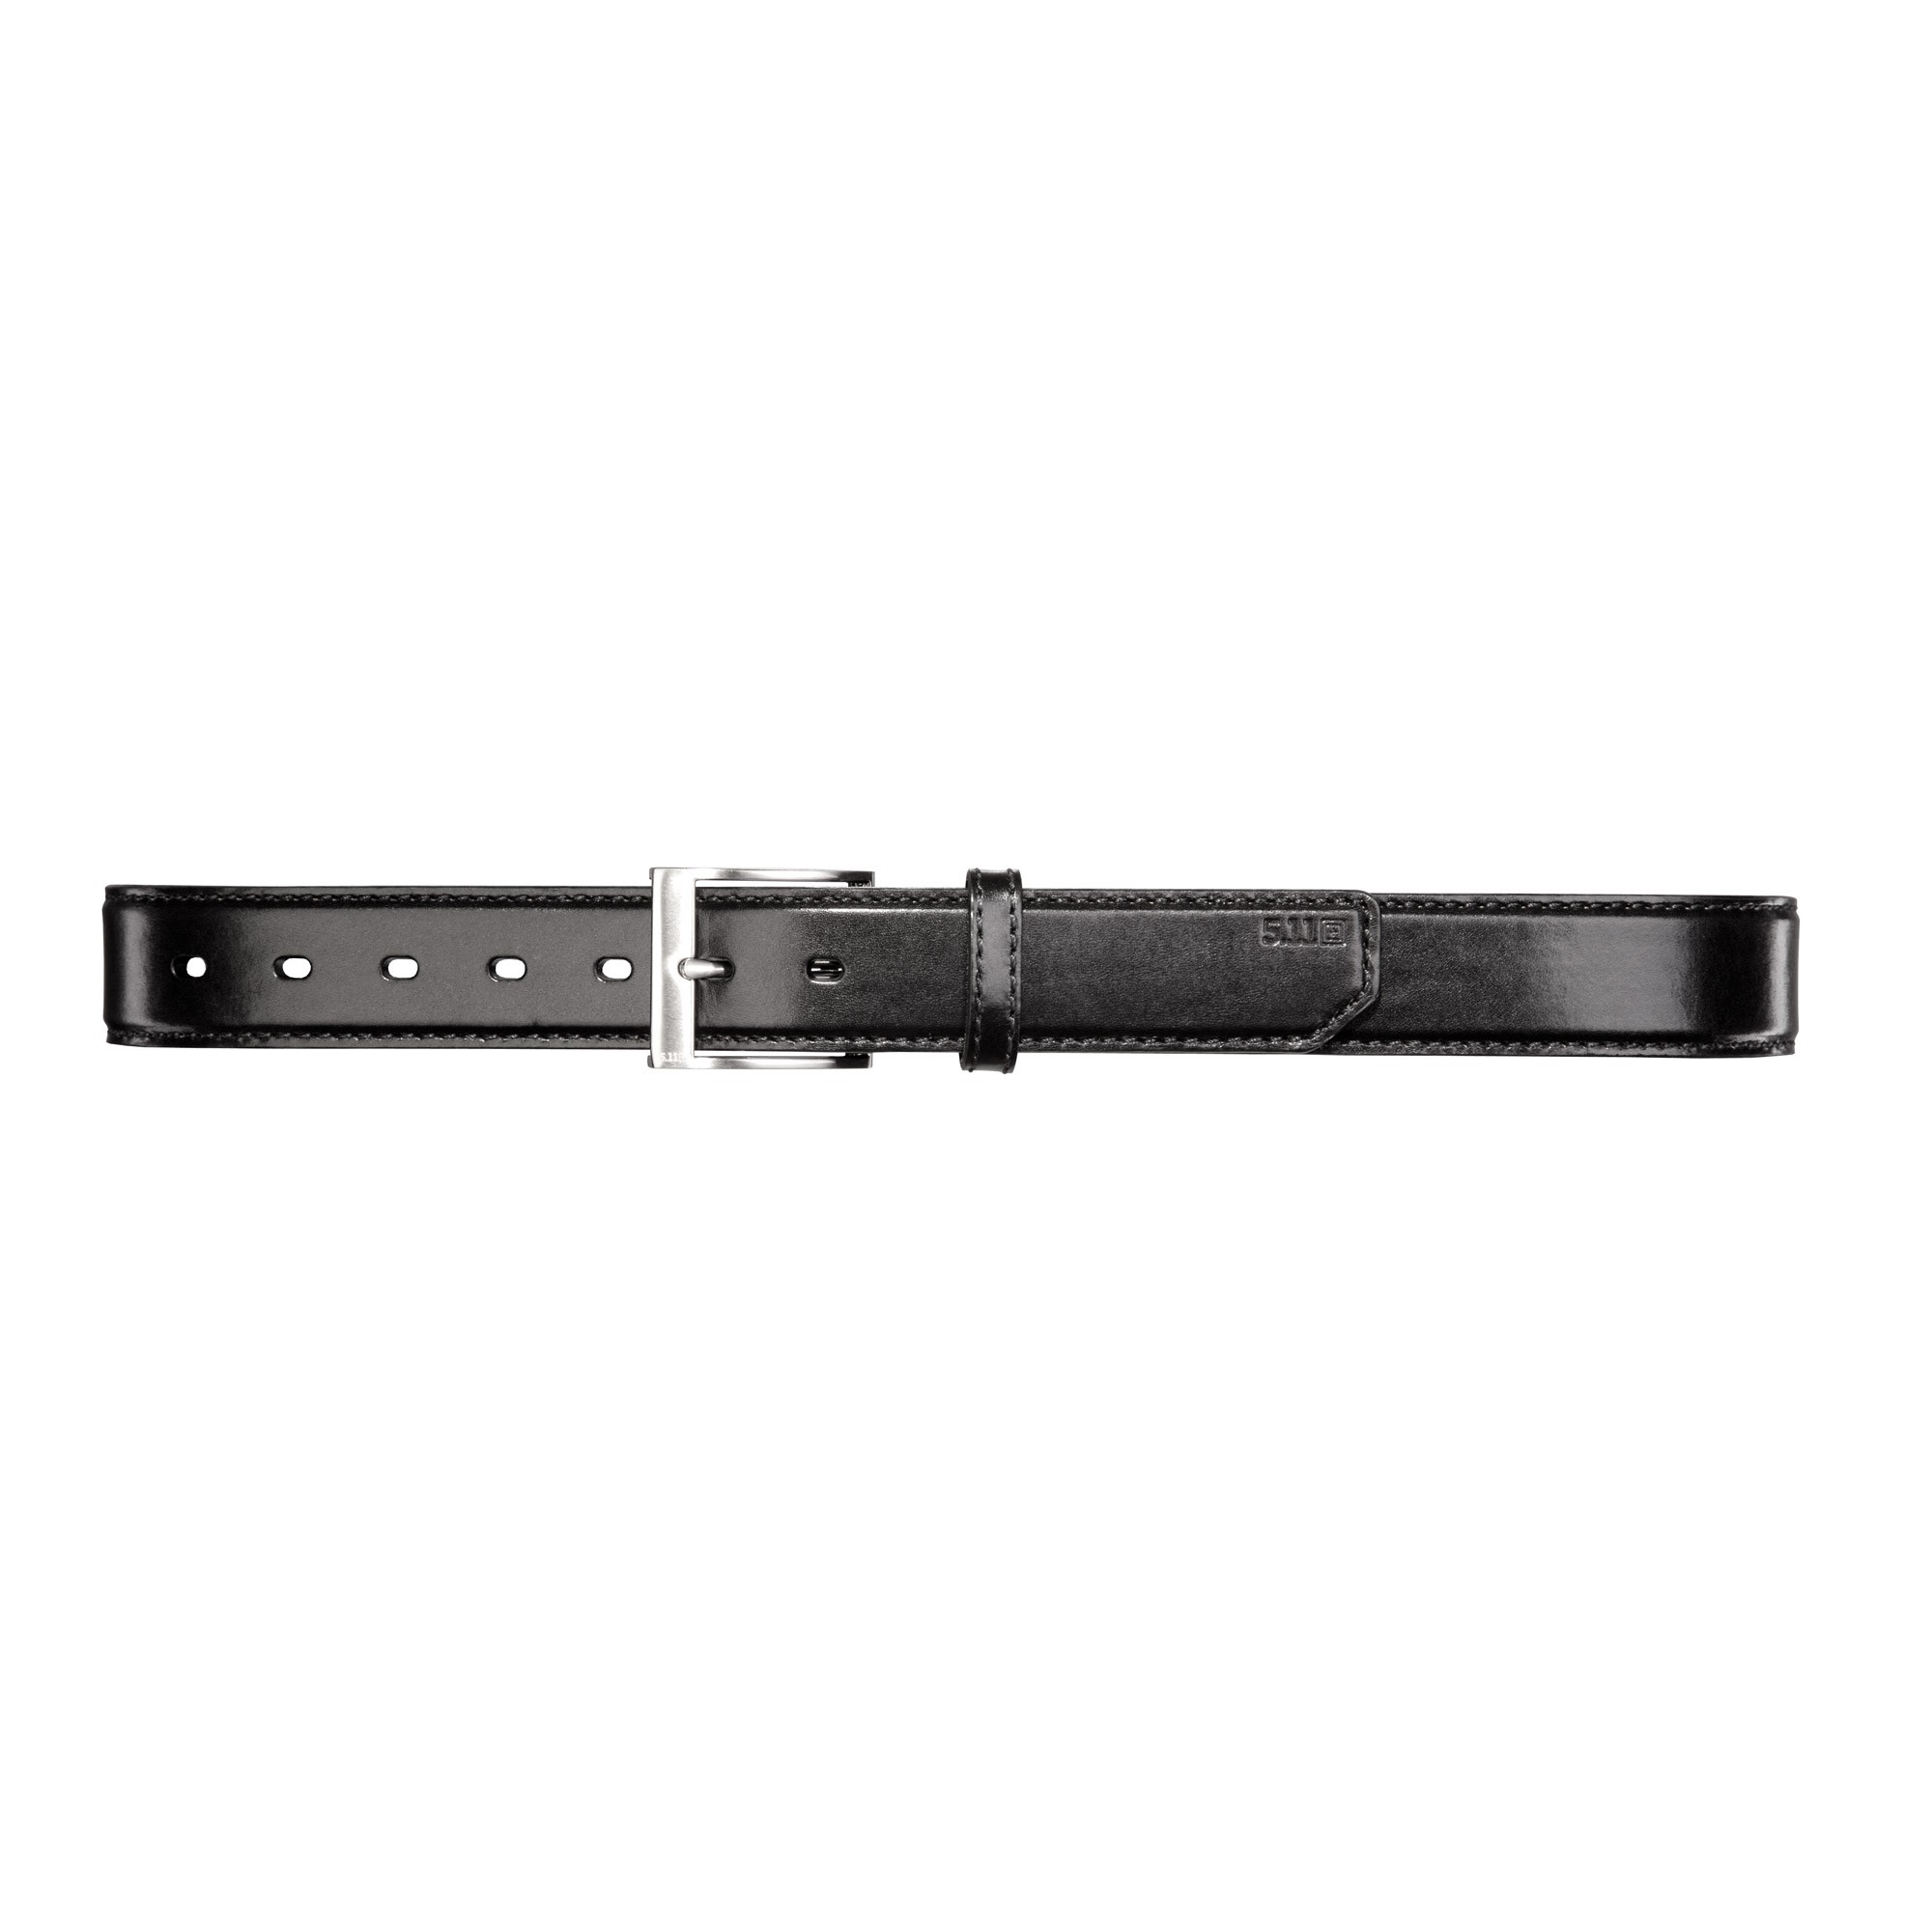 5.11 Casual Leather Belt  – 1.5″ Wide